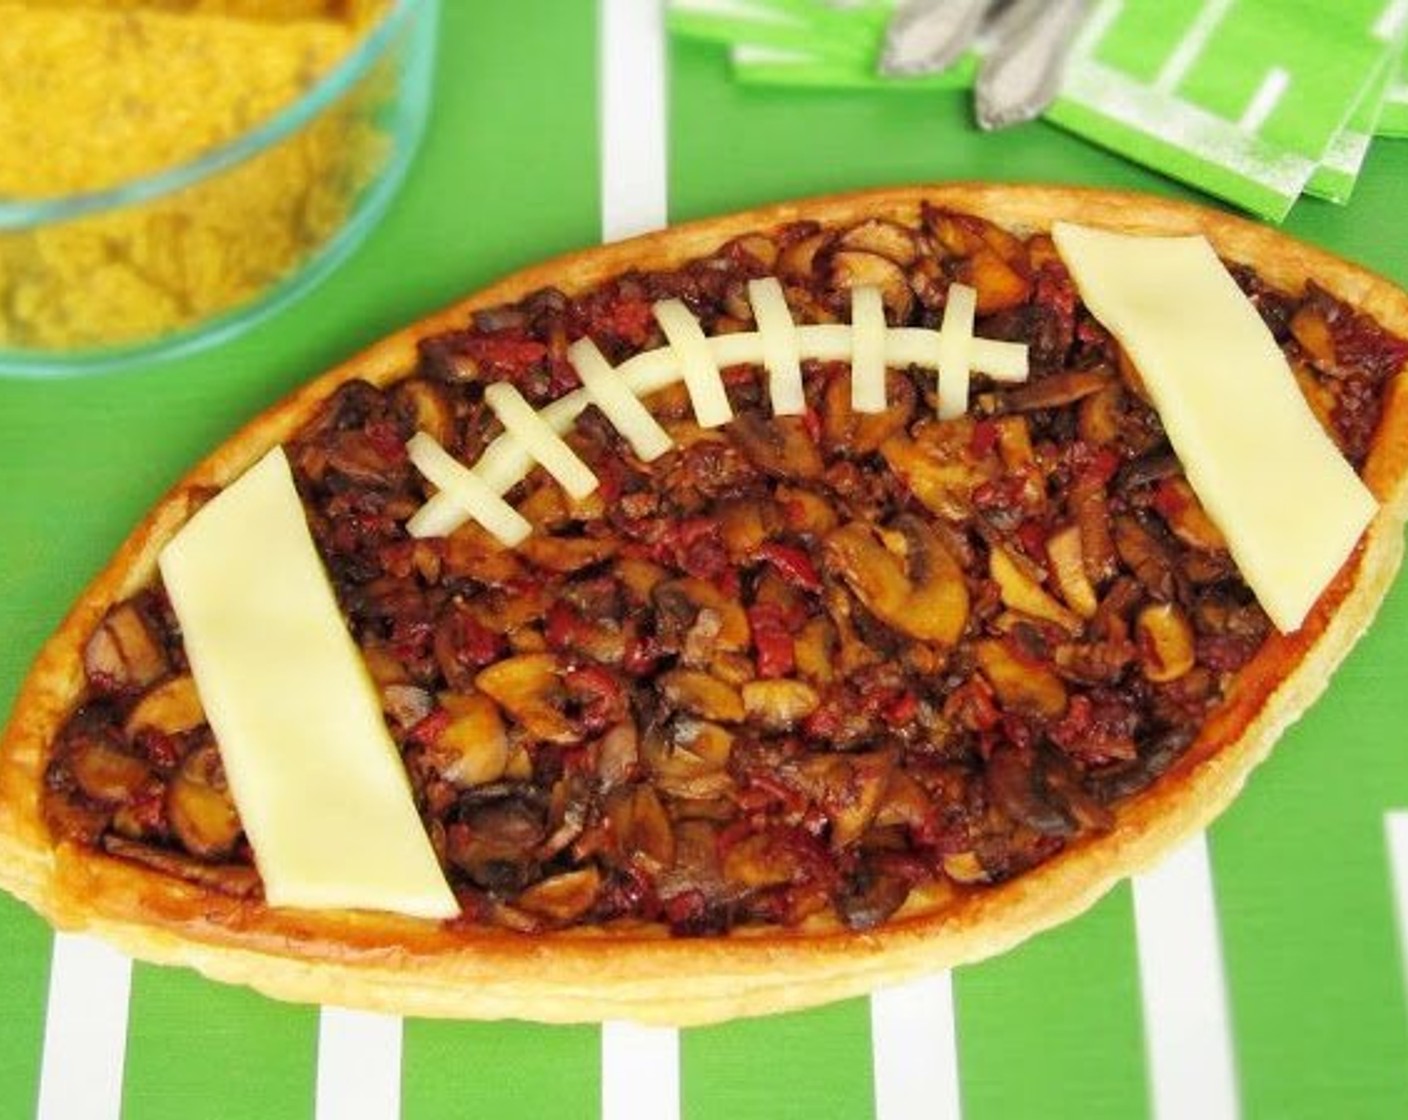 step 18 Cut 3 thin slices of White Cheese (3 slices) from a block of cheese then cut them into the desired shapes (or use rectangular cheese slices). Use the cheese slices to make the laces and stripes on the football. Set on the hot tart to melt the cheese slightly. Serve hot.